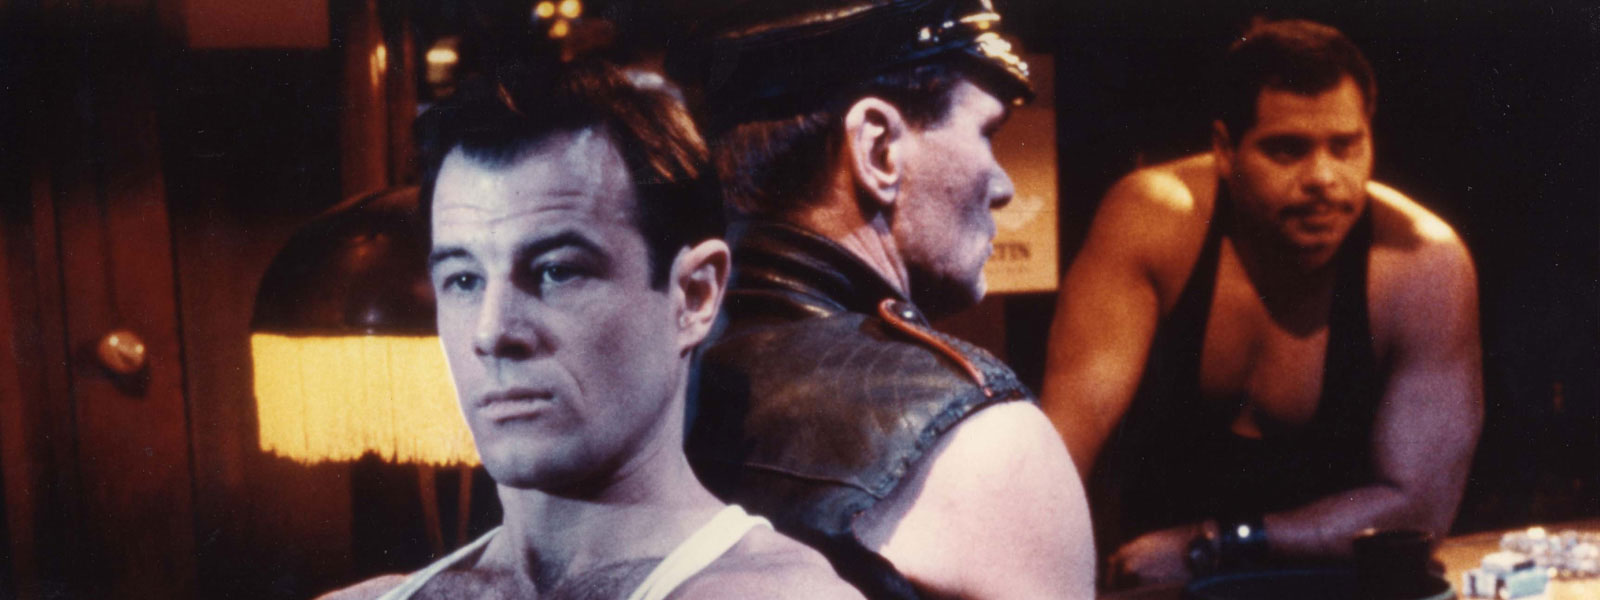 Image from 'Querelle'